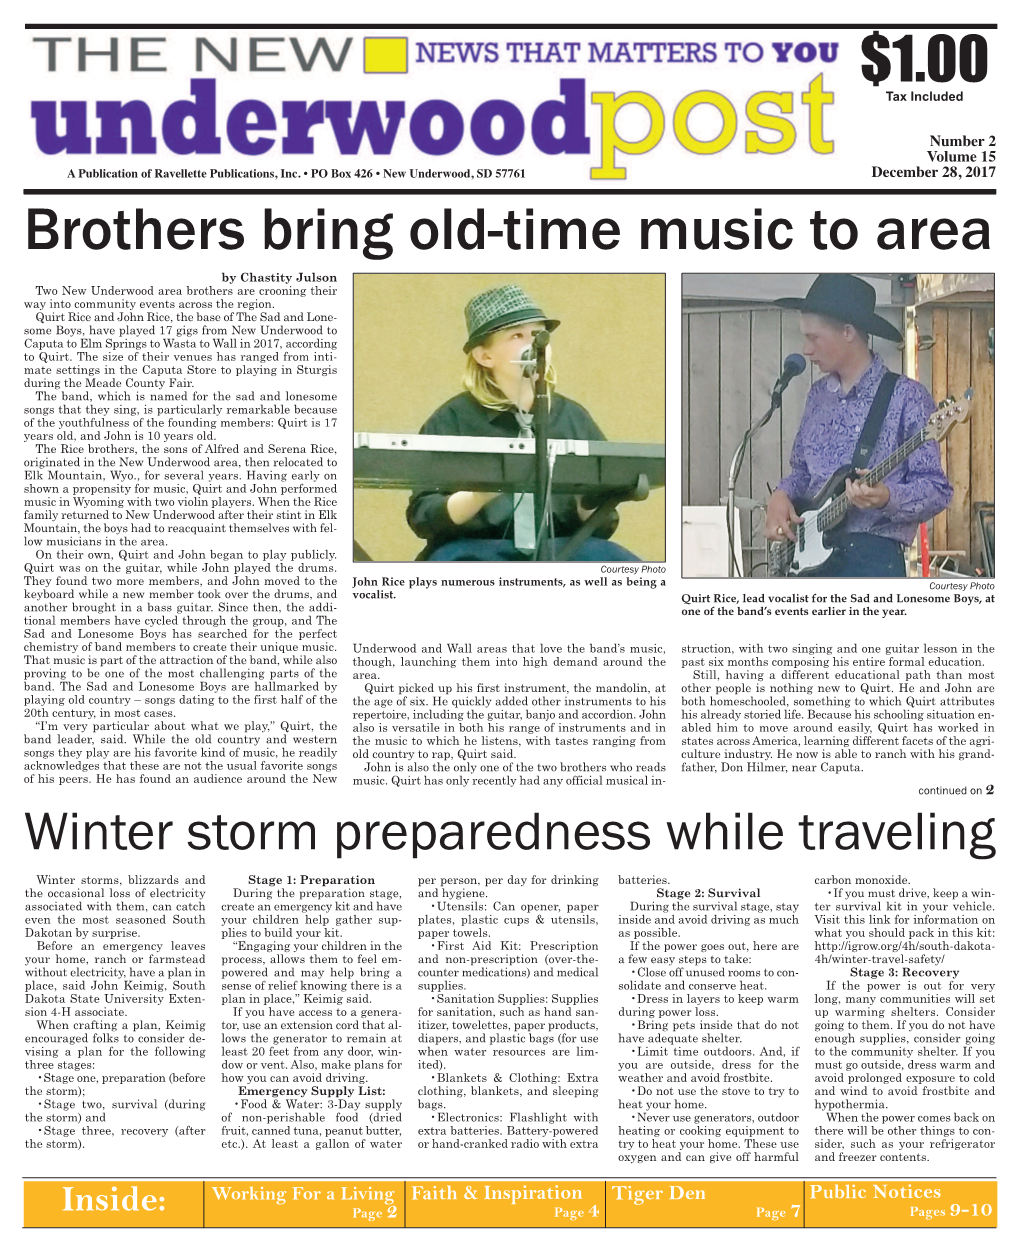 Brothers Bring Old-Time Music to Area